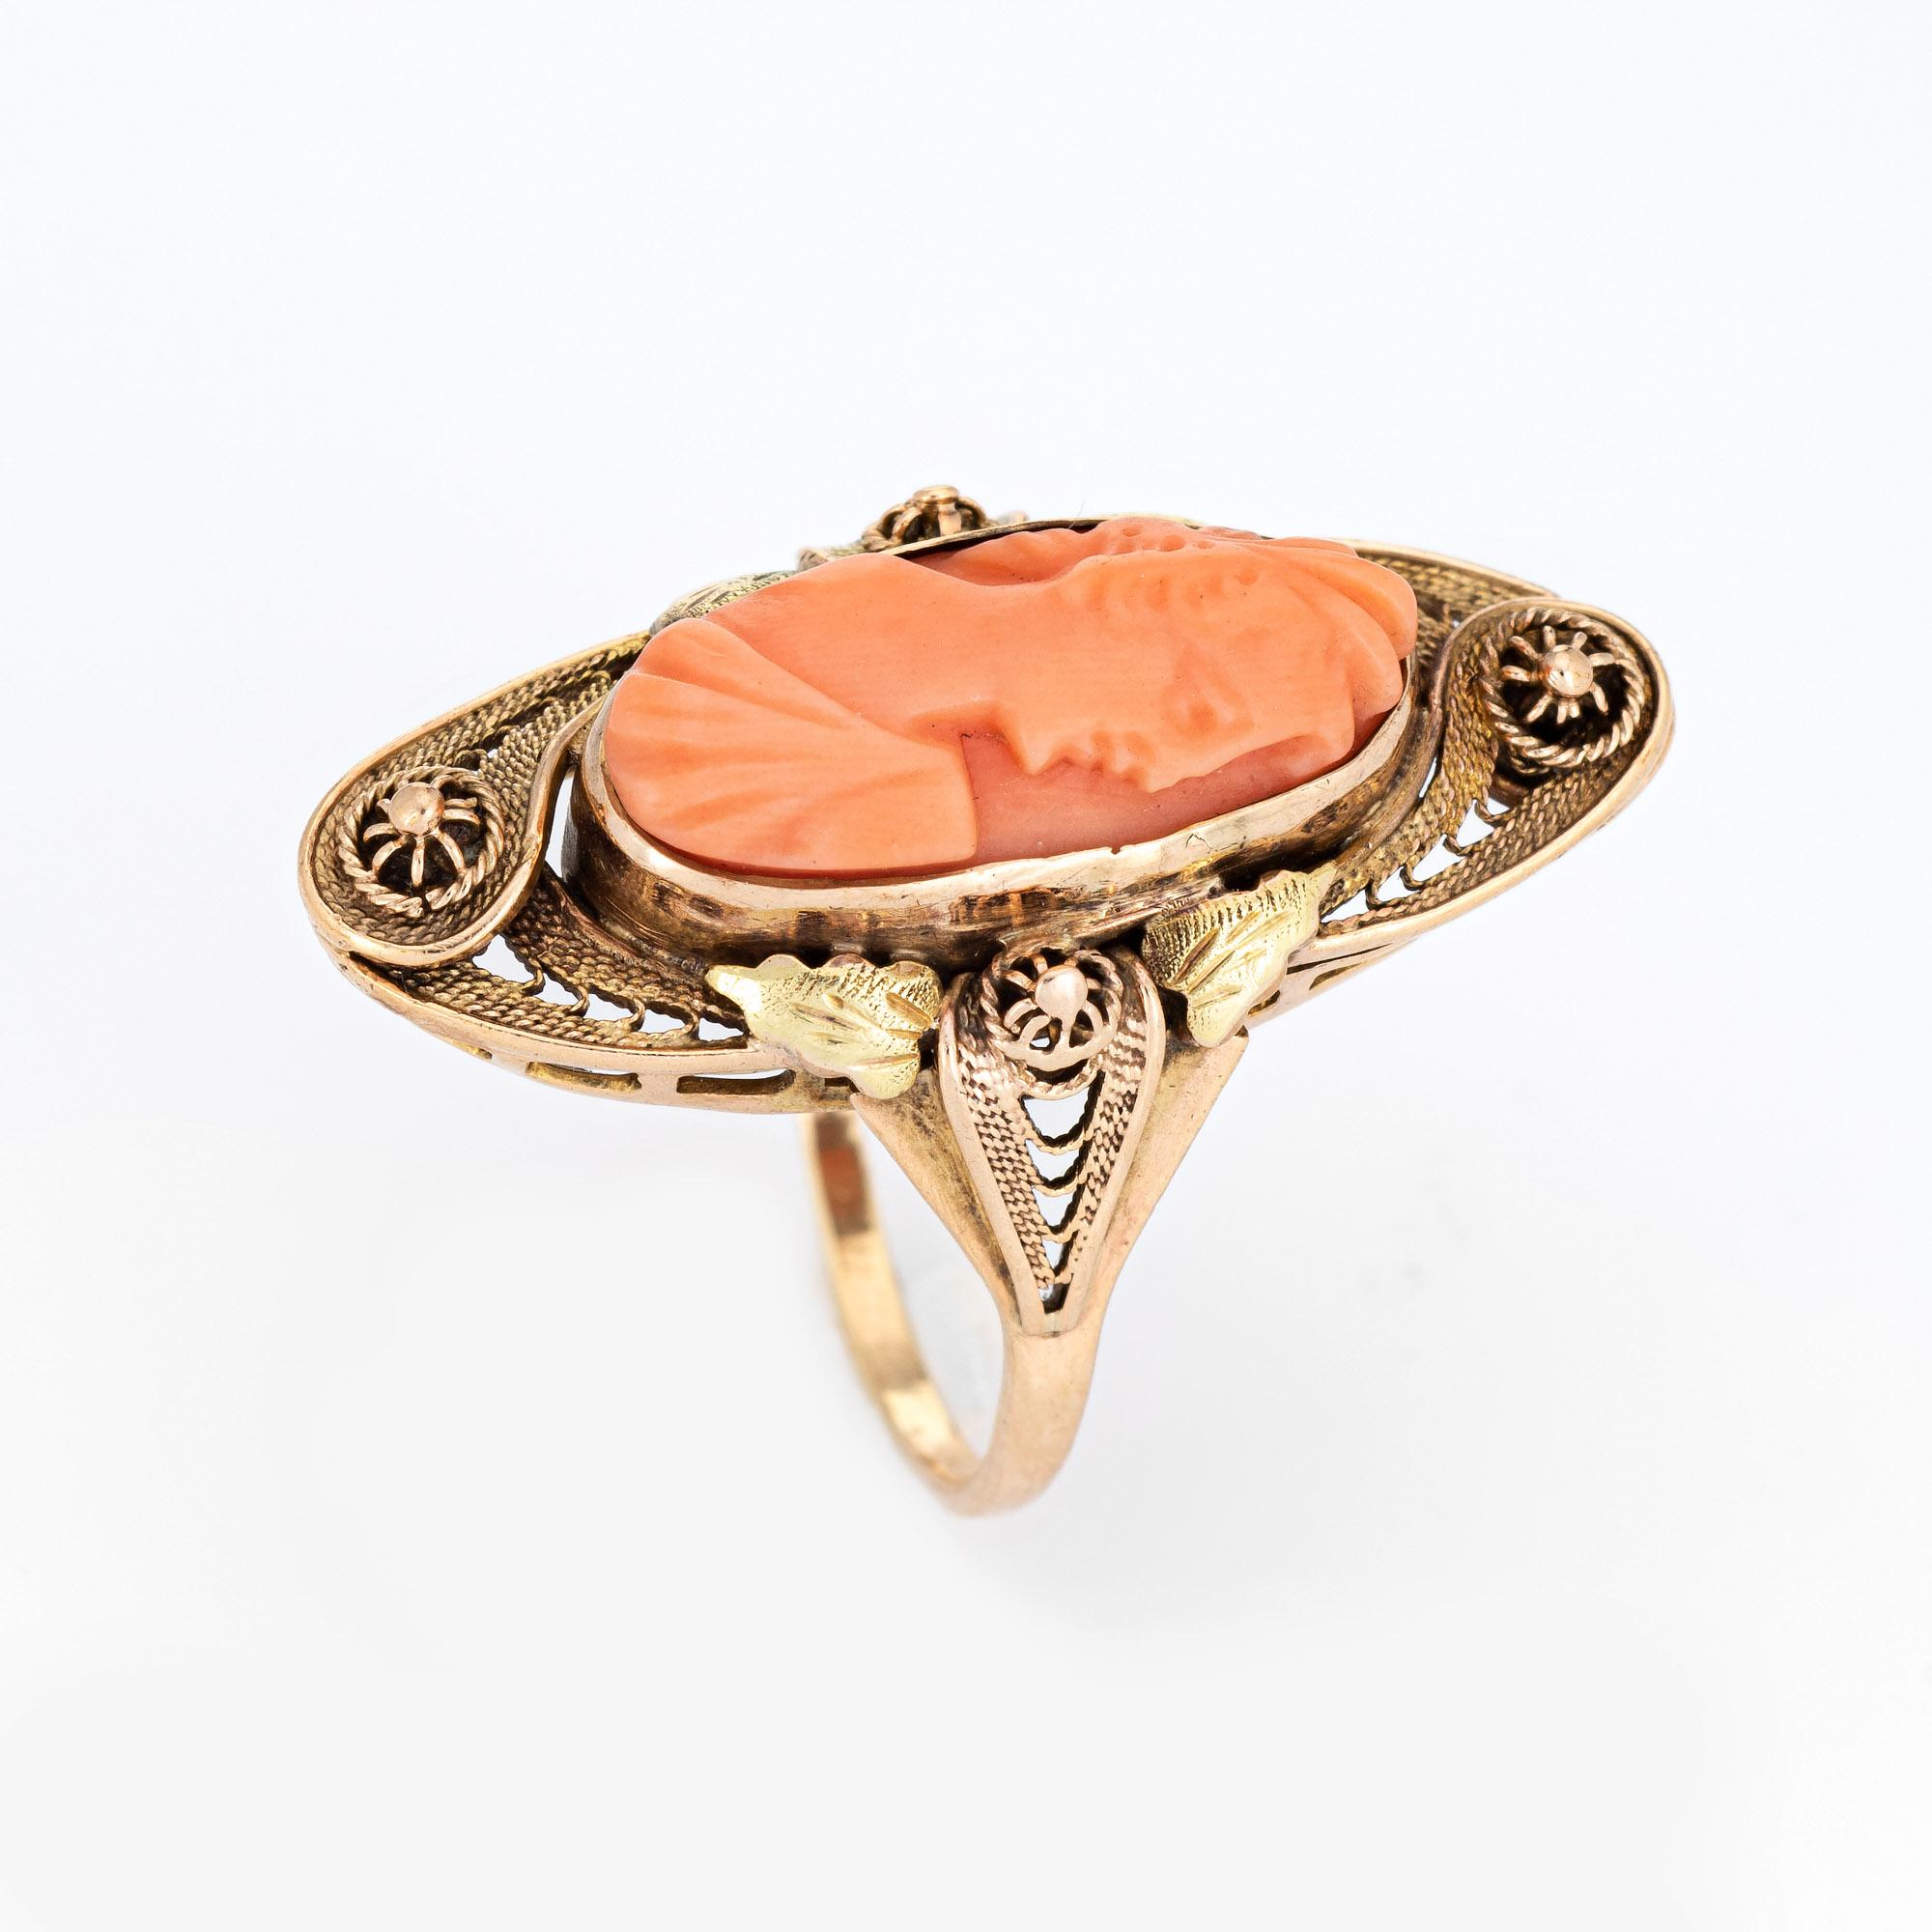 Finely detailed antique Victorian carved cameo ring (circa 1880s to 1900s) crafted in 10 karat yellow gold. 

Natural carved coral measures 16mm x 8mm. The coral is in good condition (free of cracks or chips yet showing some wear). 

The coral cameo